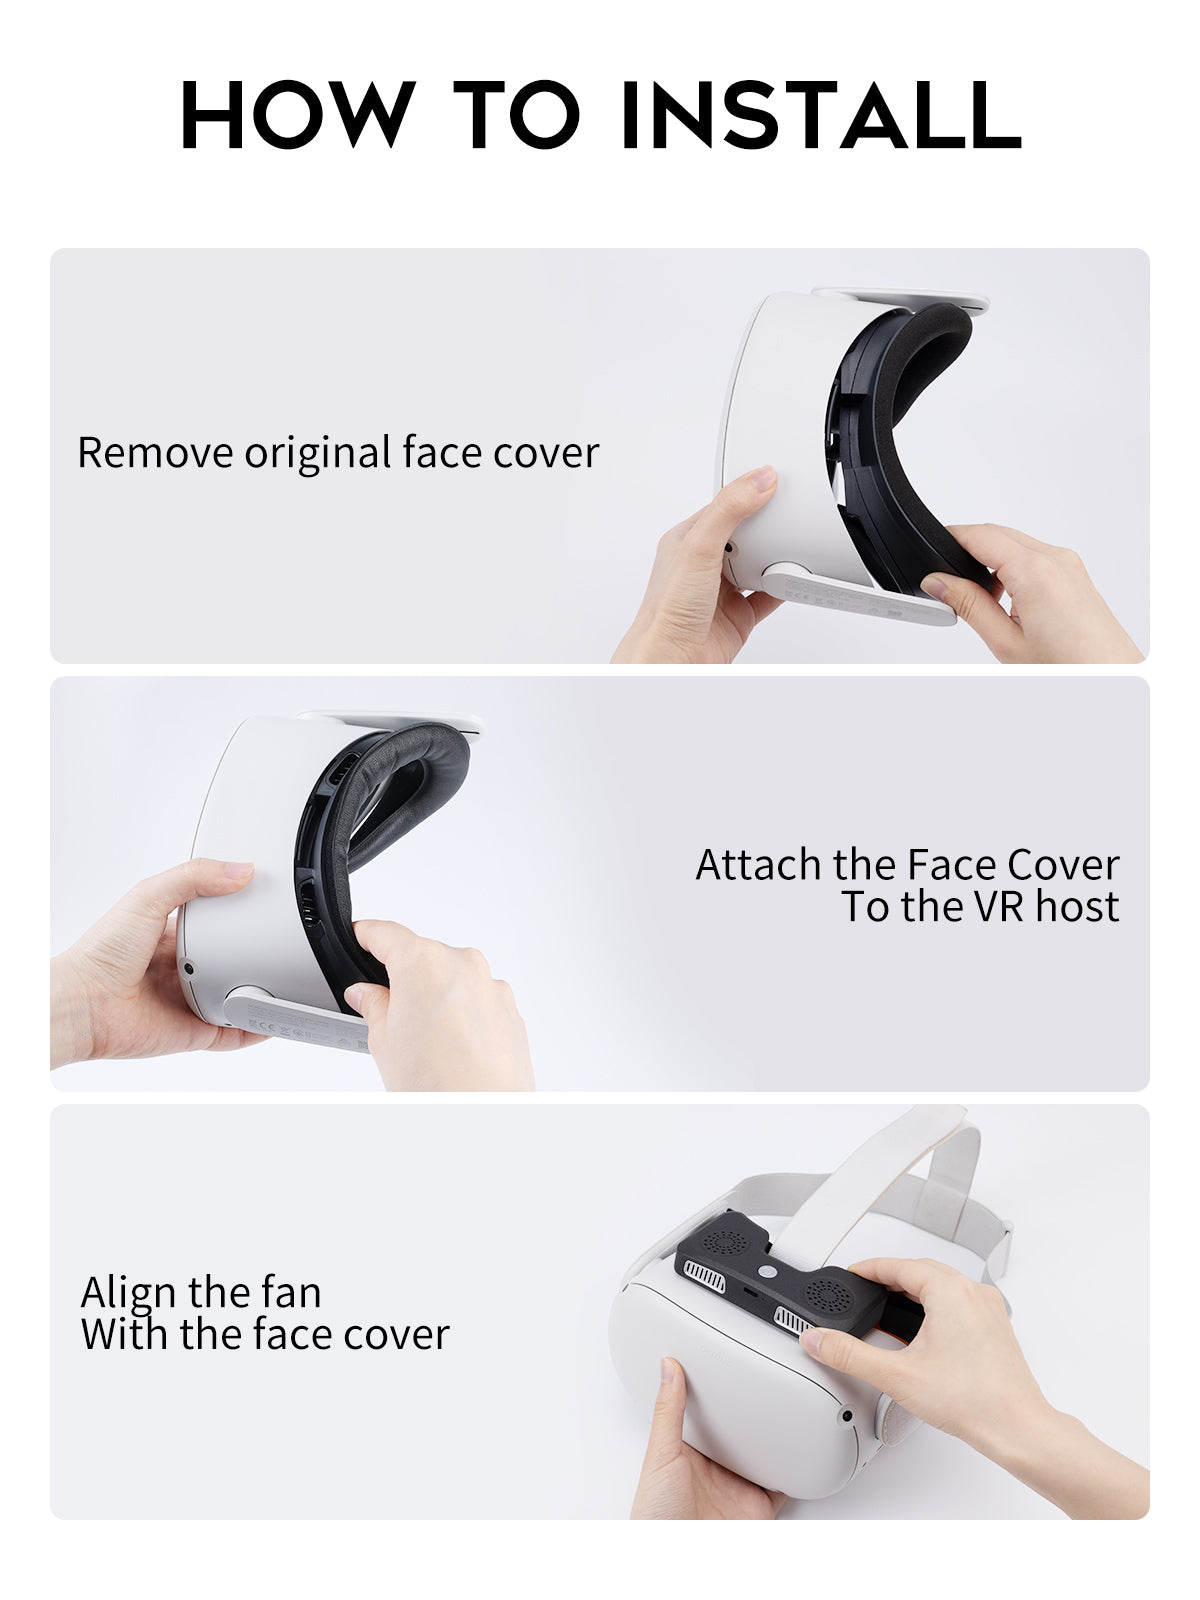 Cooling Fan Face Cover for Meta/Oculus Quest 2 Accessories, Fitness Facial Interface with Leather Face Pad, Anti-fogging Cooling Air Circulation, (3 Speeds)